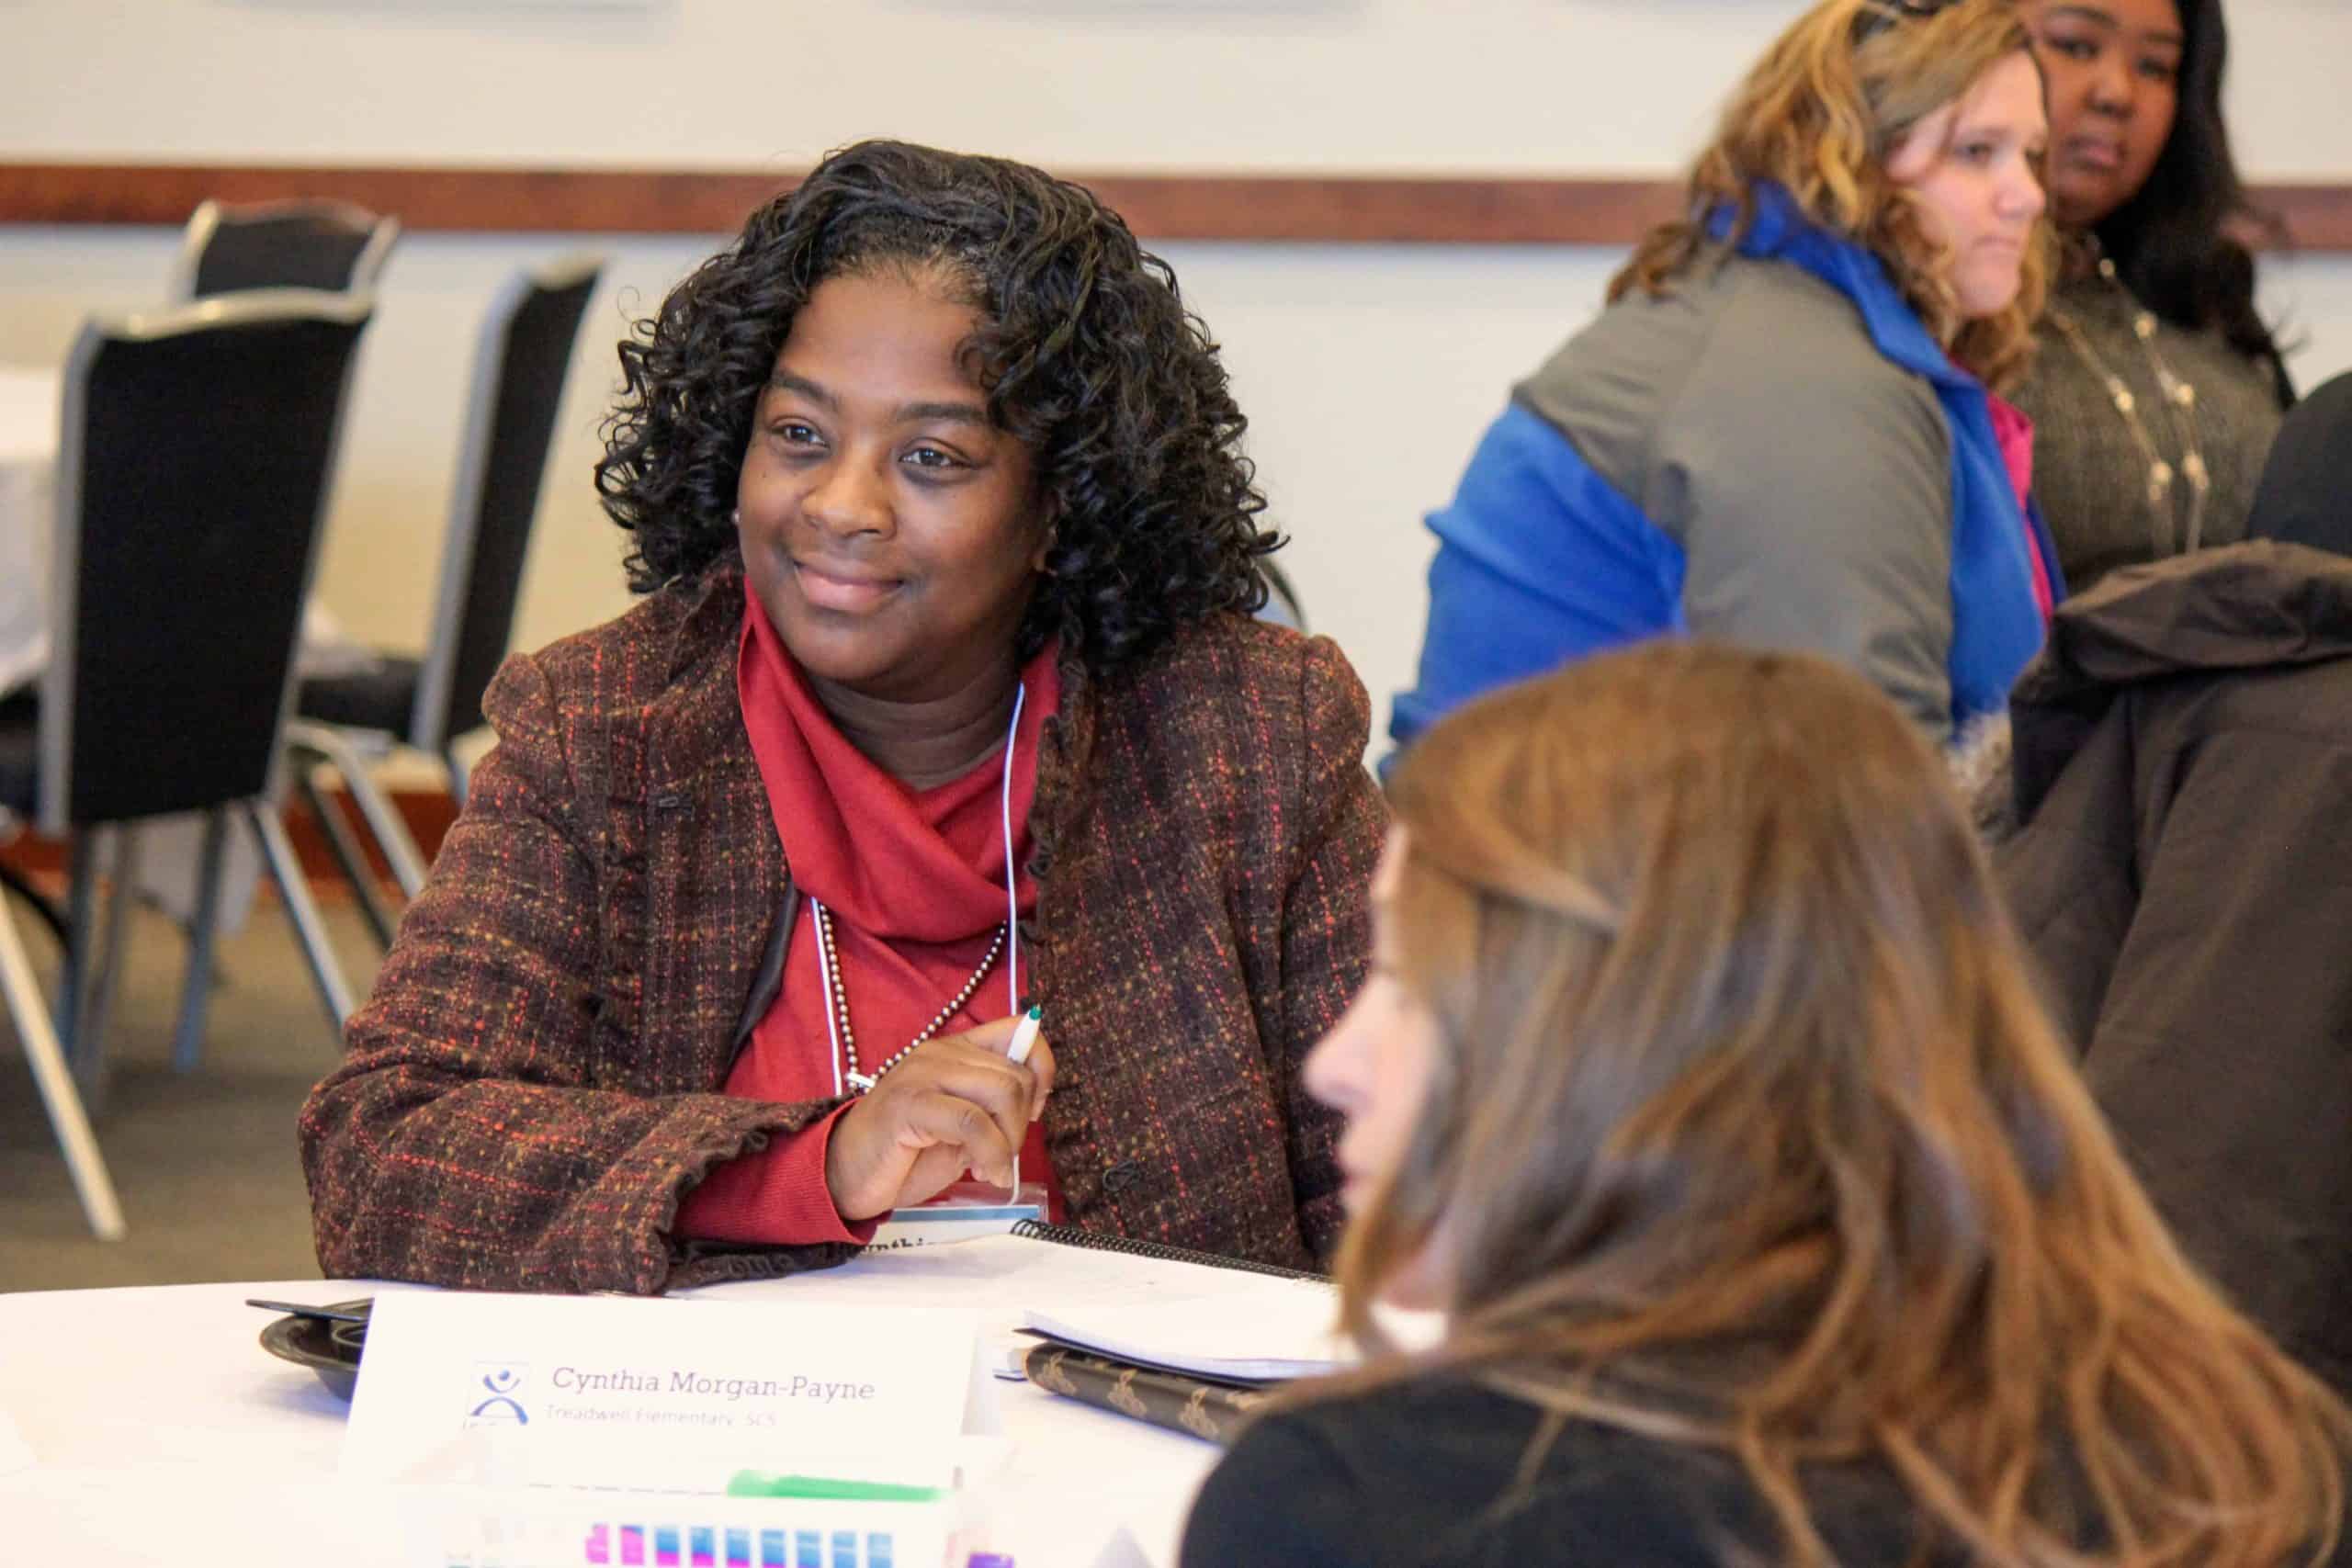 A participant in the Memphis fellowship sits at a table and smiles.